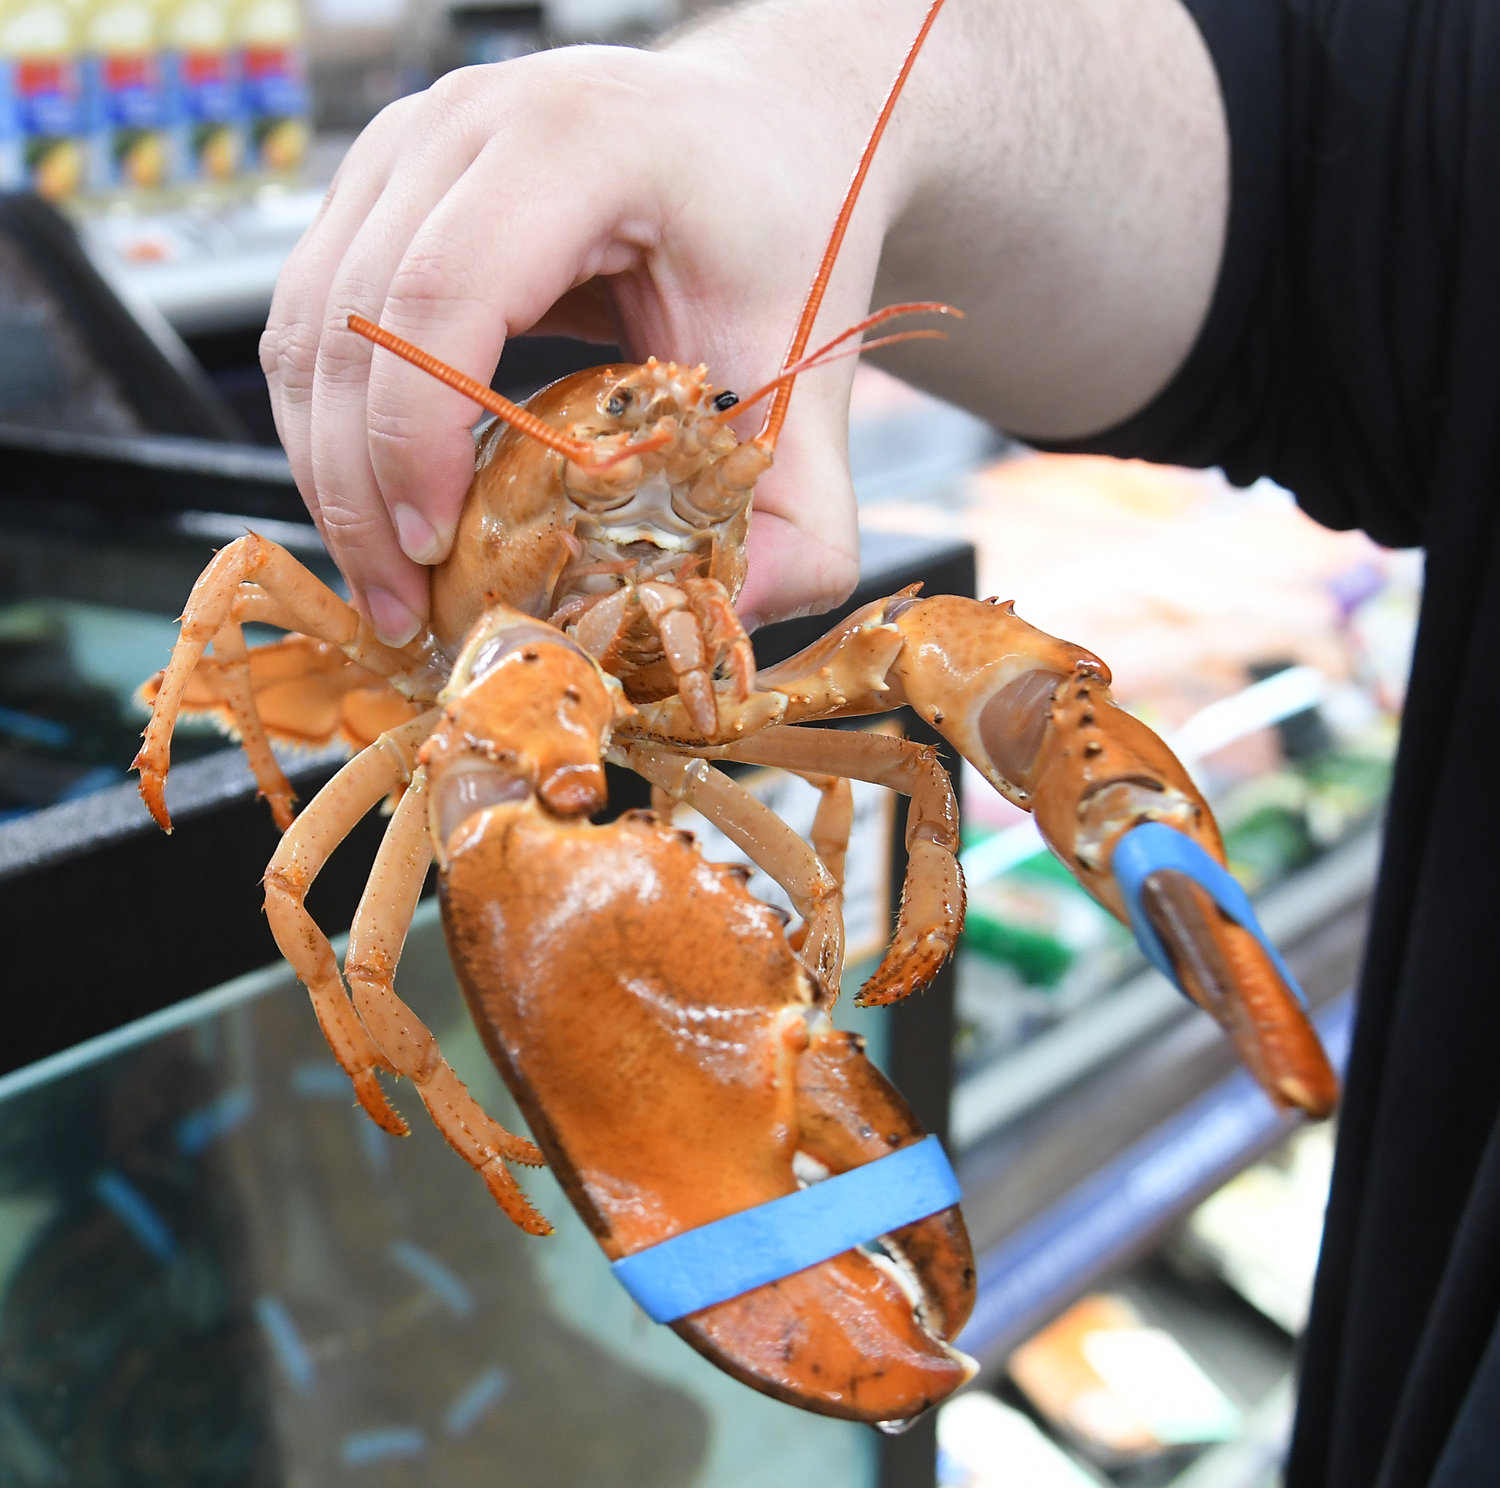 Cheeto will have a long life on display at Fort Rickey later this week or next. Cheeto is held by Tops Friendly Market seafood captain/manager Kaleb Collins Wednesday morning.